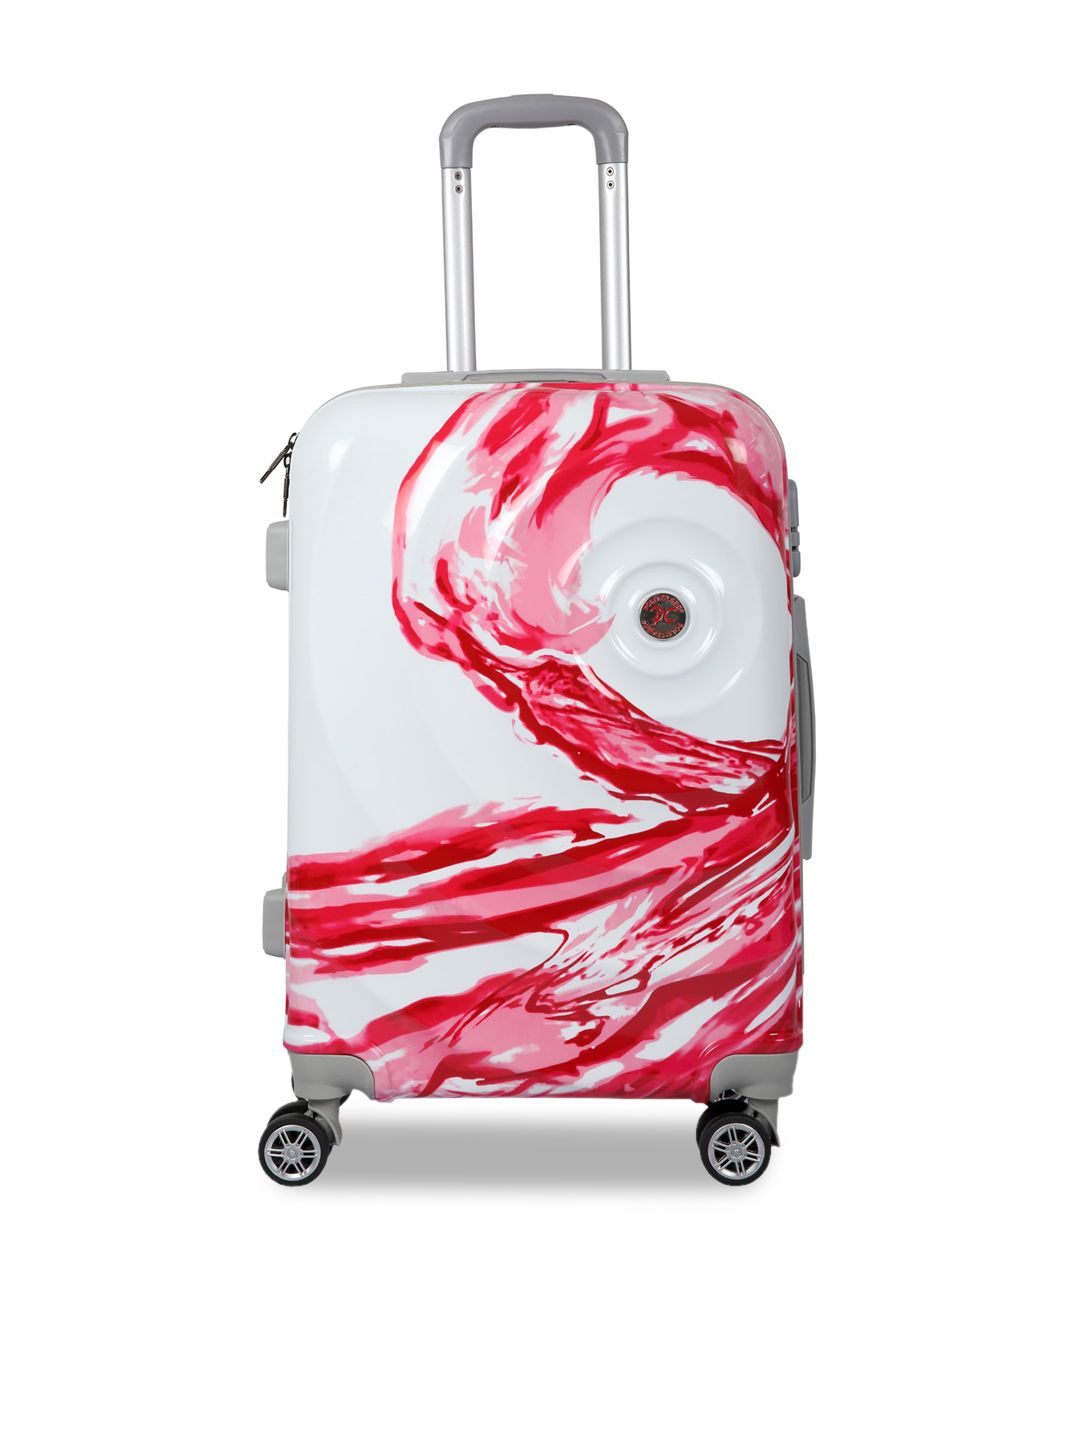 Polo Class Red & White Printed Hard-Sided 360 Degree Rotation Large Trolley Suitcase Price in India